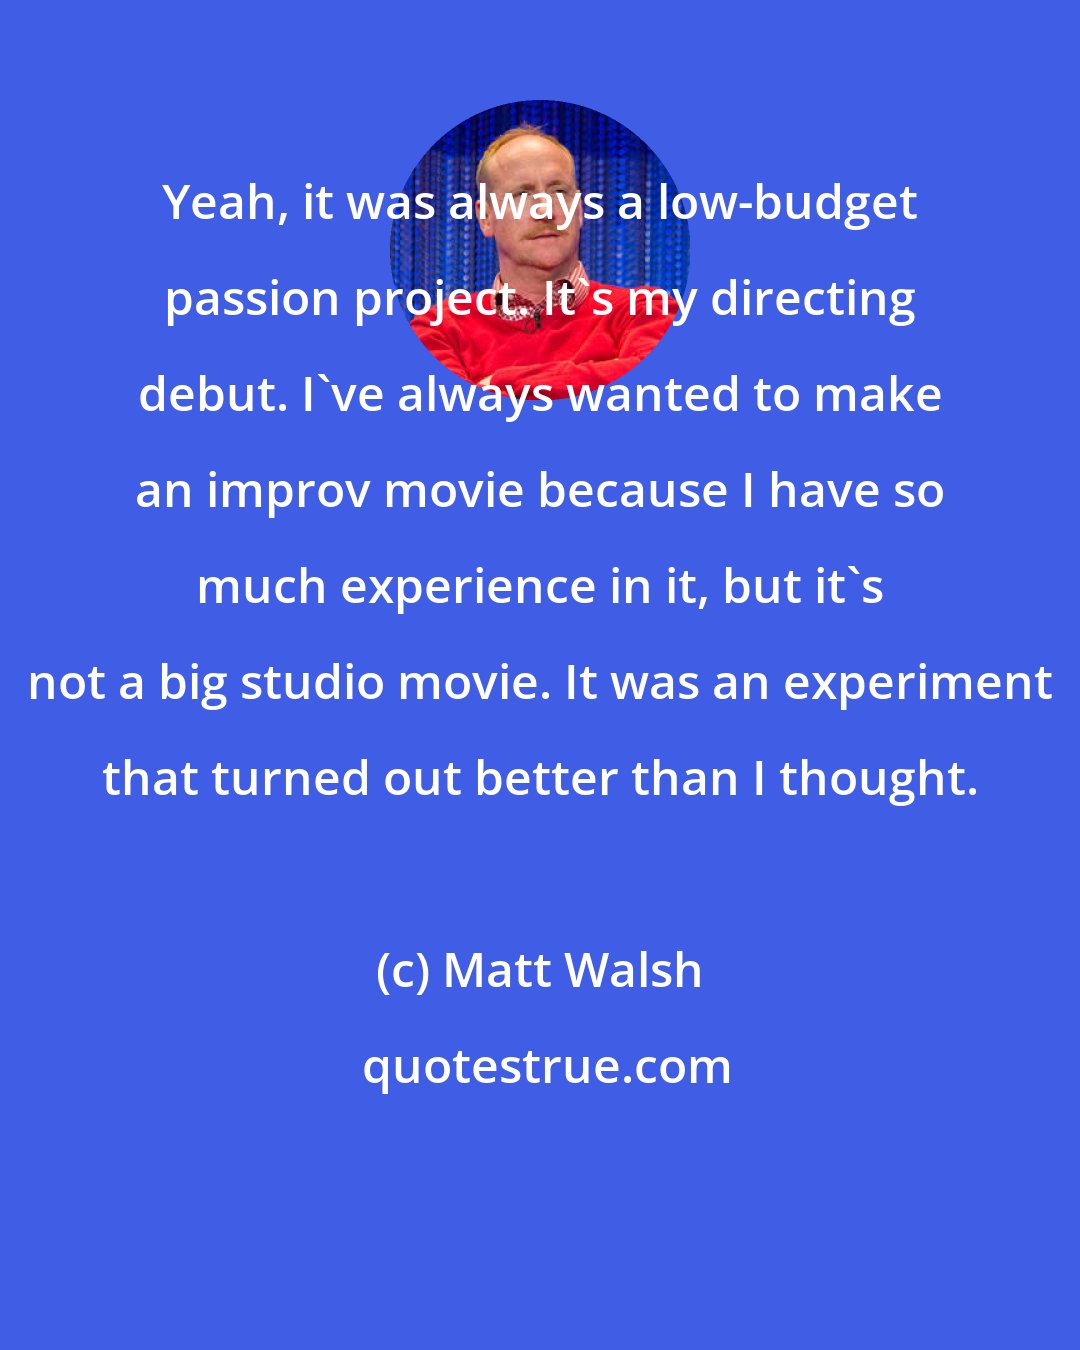 Matt Walsh: Yeah, it was always a low-budget passion project. It's my directing debut. I've always wanted to make an improv movie because I have so much experience in it, but it's not a big studio movie. It was an experiment that turned out better than I thought.